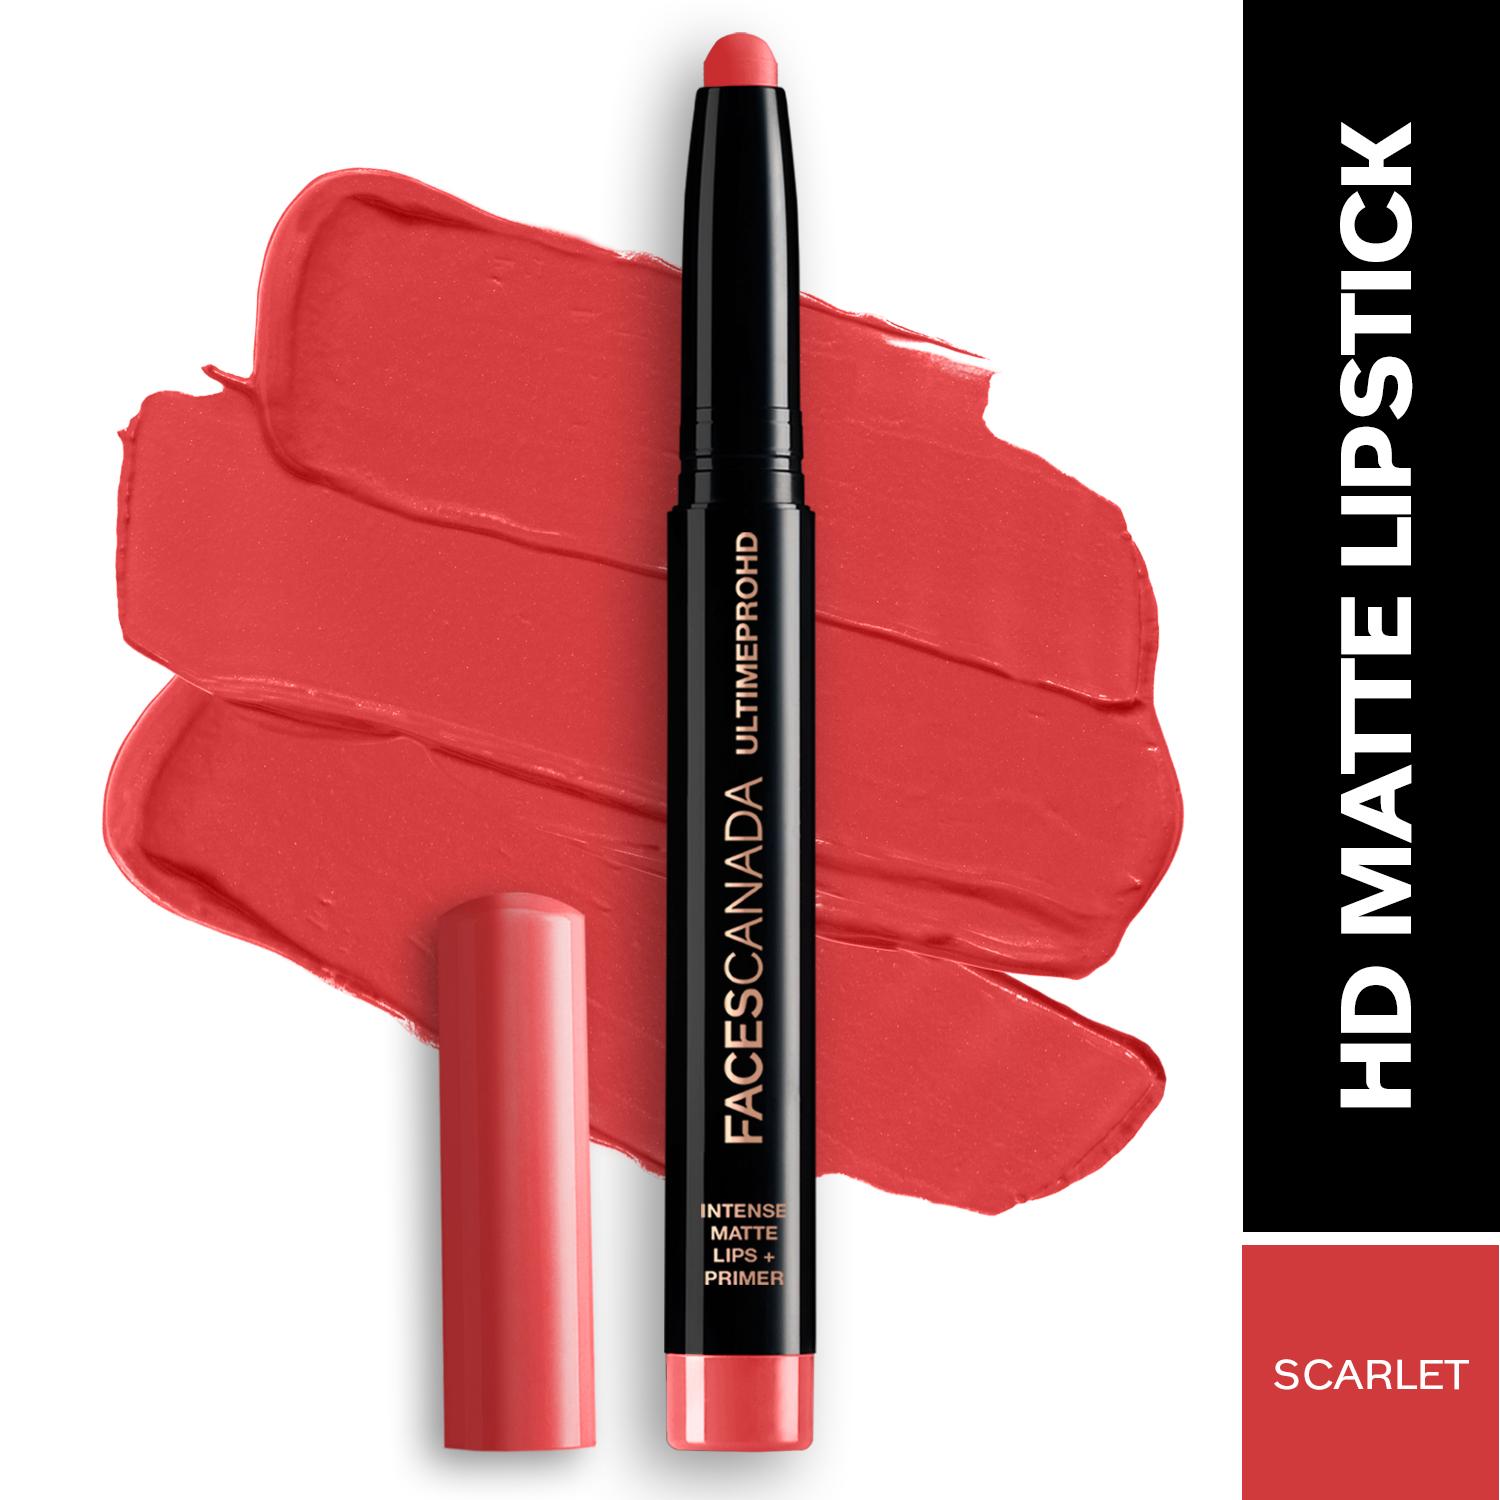 Faces Canada | Faces Canada Ultime Pro HD Intense Matte Lips + Primer, 9HR Long Stay - Scarlet 06 (1.4 g)